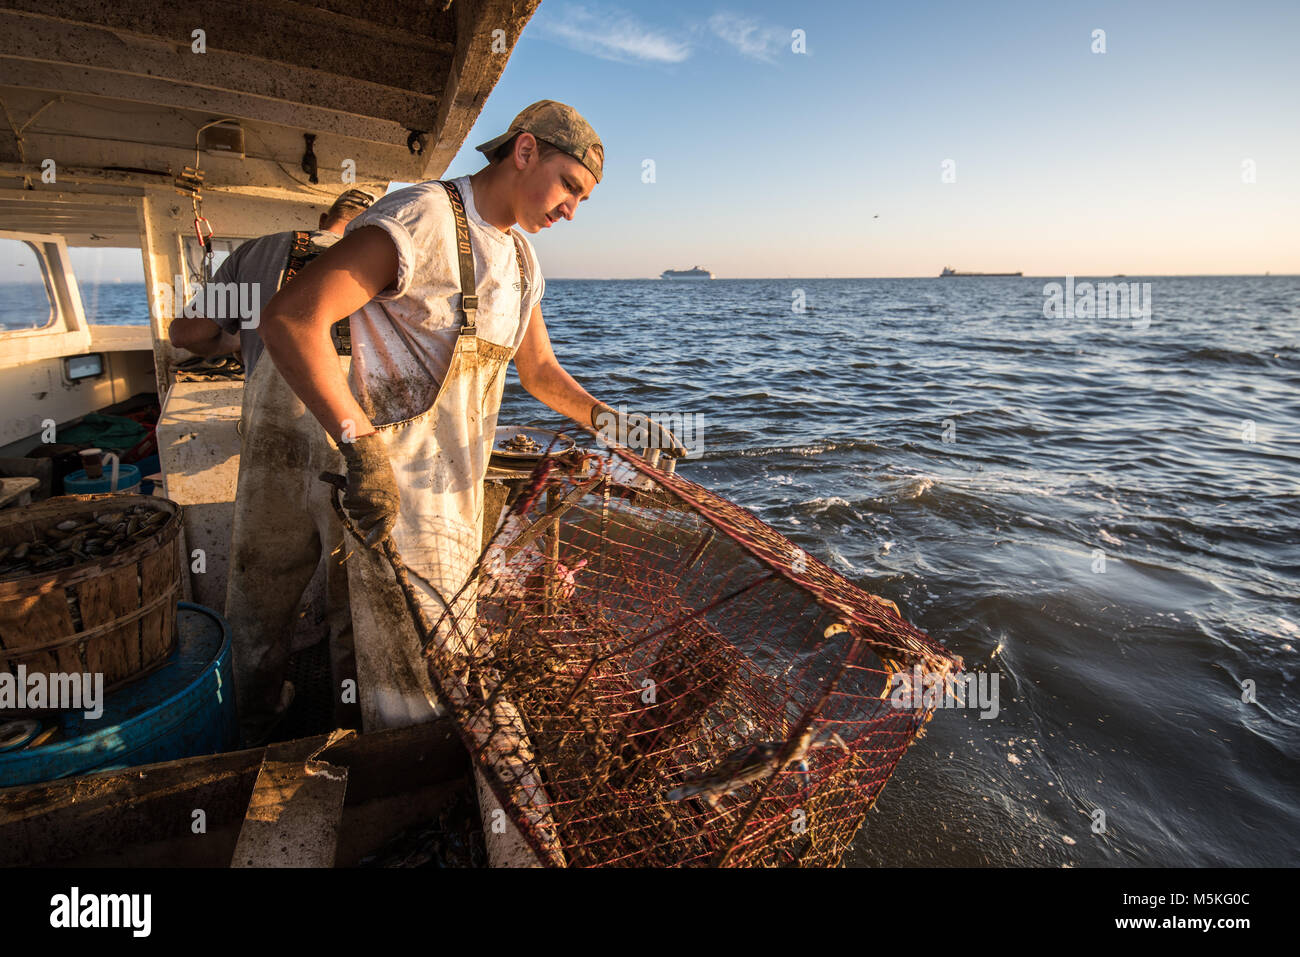 Young waterman pulling in crab trap onto boat on the Chesapeake Bay with the horizon in the background, Dundalk, Maryland. Stock Photo